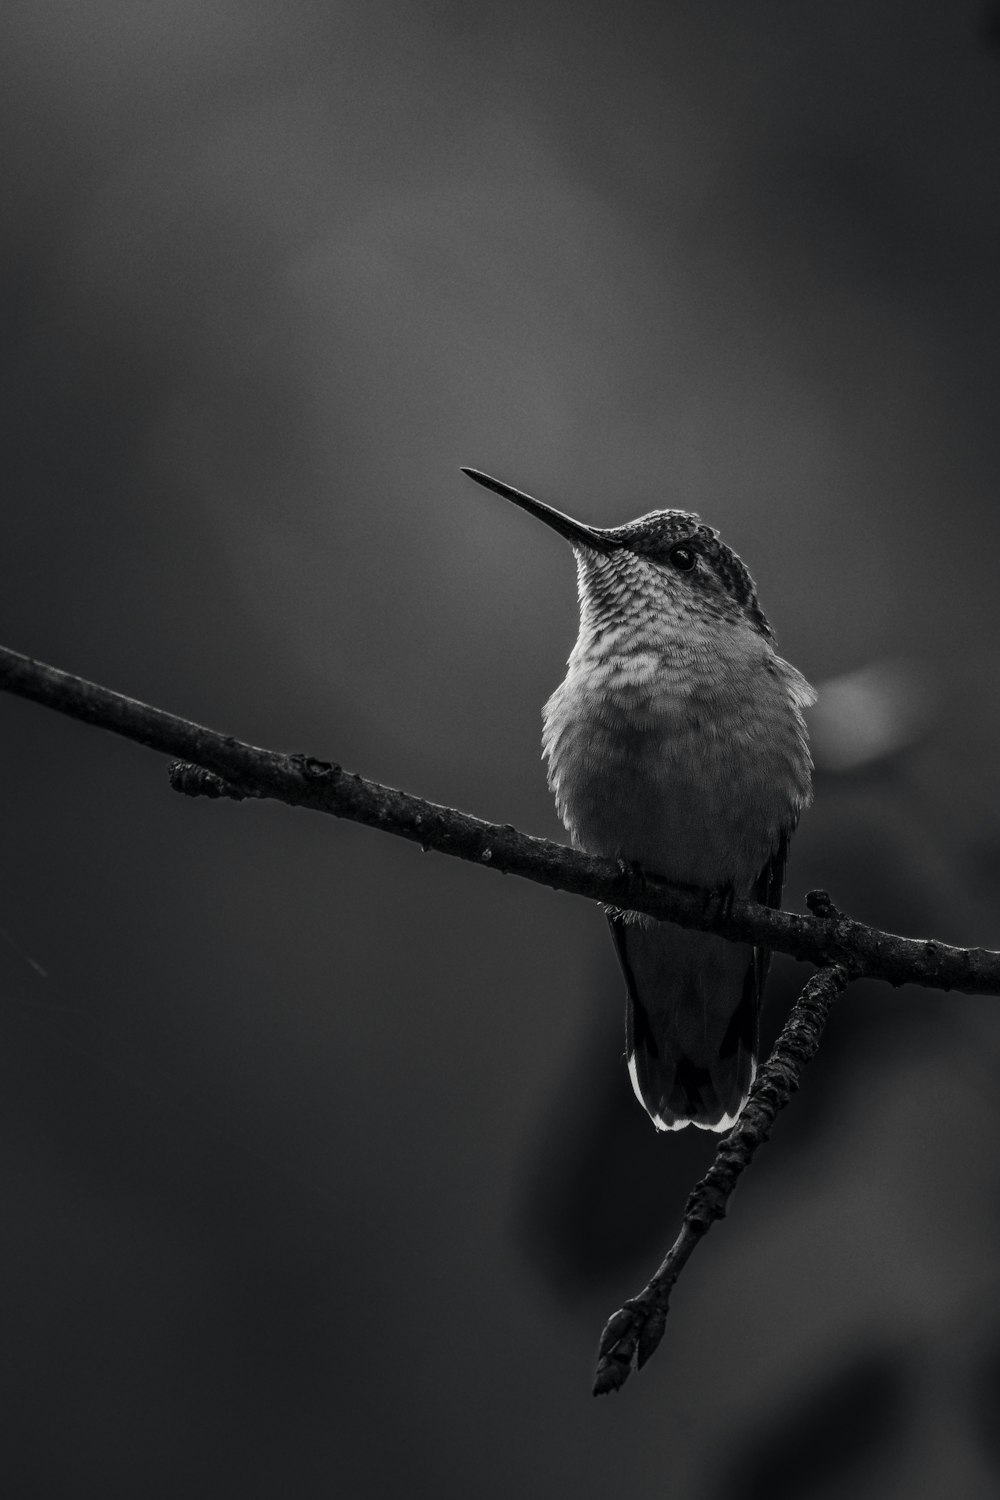 a black and white photo of a hummingbird perched on a branch